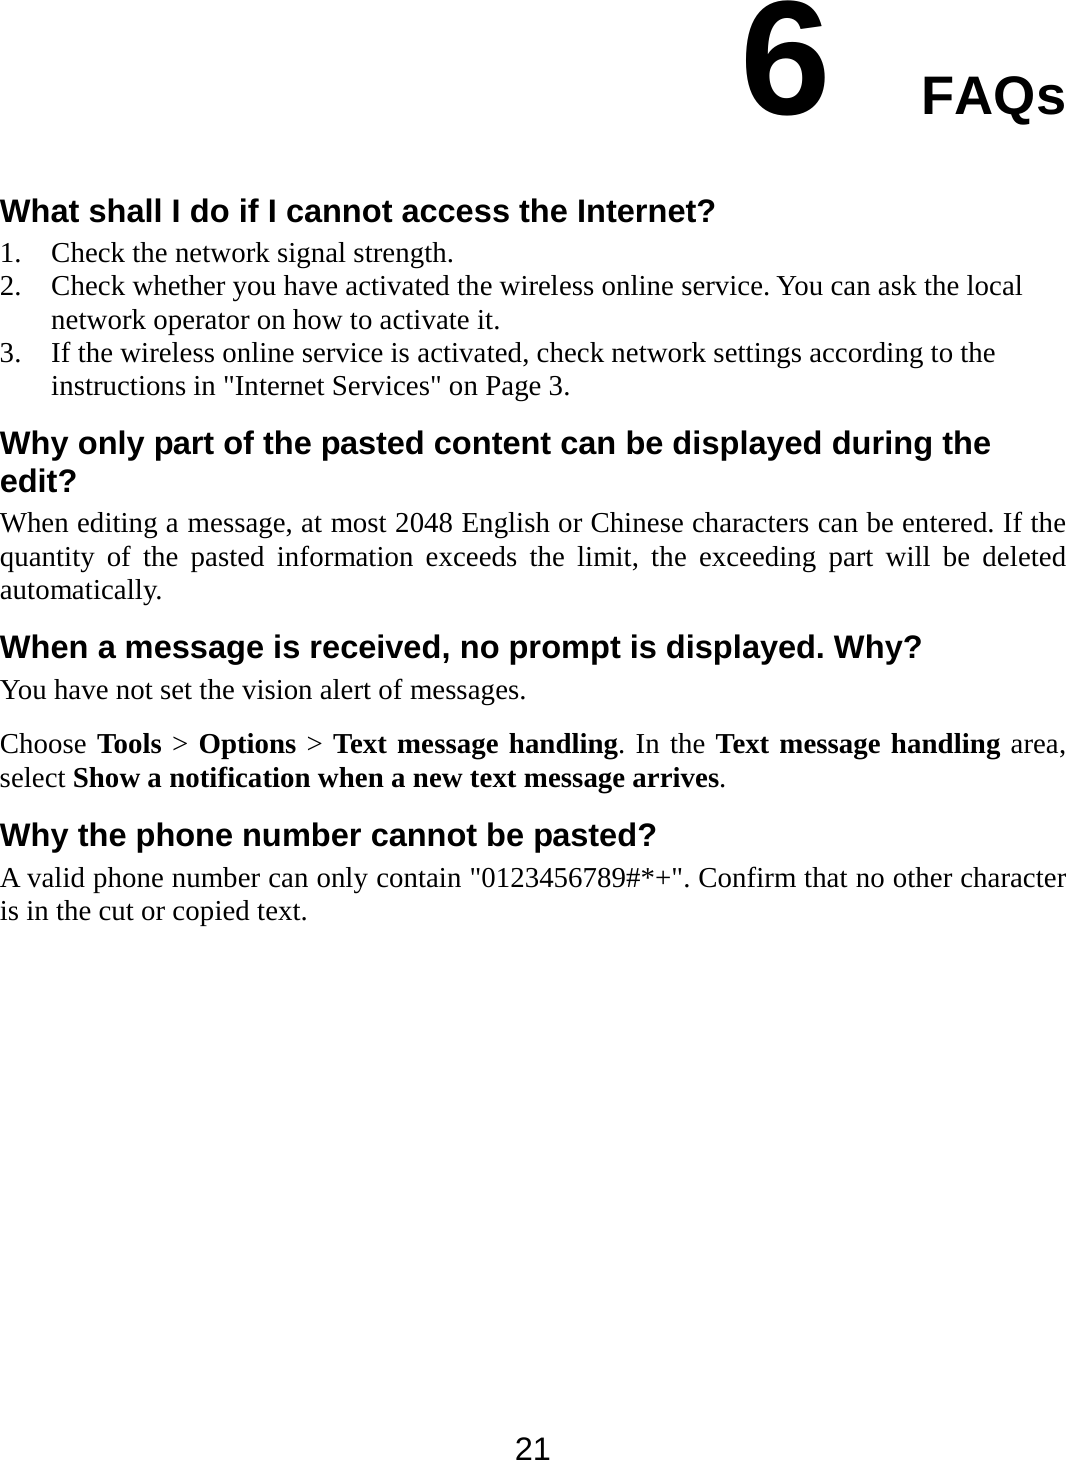  21 6  FAQs What shall I do if I cannot access the Internet? 1. Check the network signal strength. 2. Check whether you have activated the wireless online service. You can ask the local network operator on how to activate it. 3. If the wireless online service is activated, check network settings according to the instructions in &quot;Internet Services&quot; on Page 3. Why only part of the pasted content can be displayed during the edit? When editing a message, at most 2048 English or Chinese characters can be entered. If the quantity of the pasted information exceeds the limit, the exceeding part will be deleted automatically. When a message is received, no prompt is displayed. Why? You have not set the vision alert of messages. Choose Tools &gt; Options &gt; Text message handling. In the Text message handling area, select Show a notification when a new text message arrives. Why the phone number cannot be pasted? A valid phone number can only contain &quot;0123456789#*+&quot;. Confirm that no other character is in the cut or copied text. 